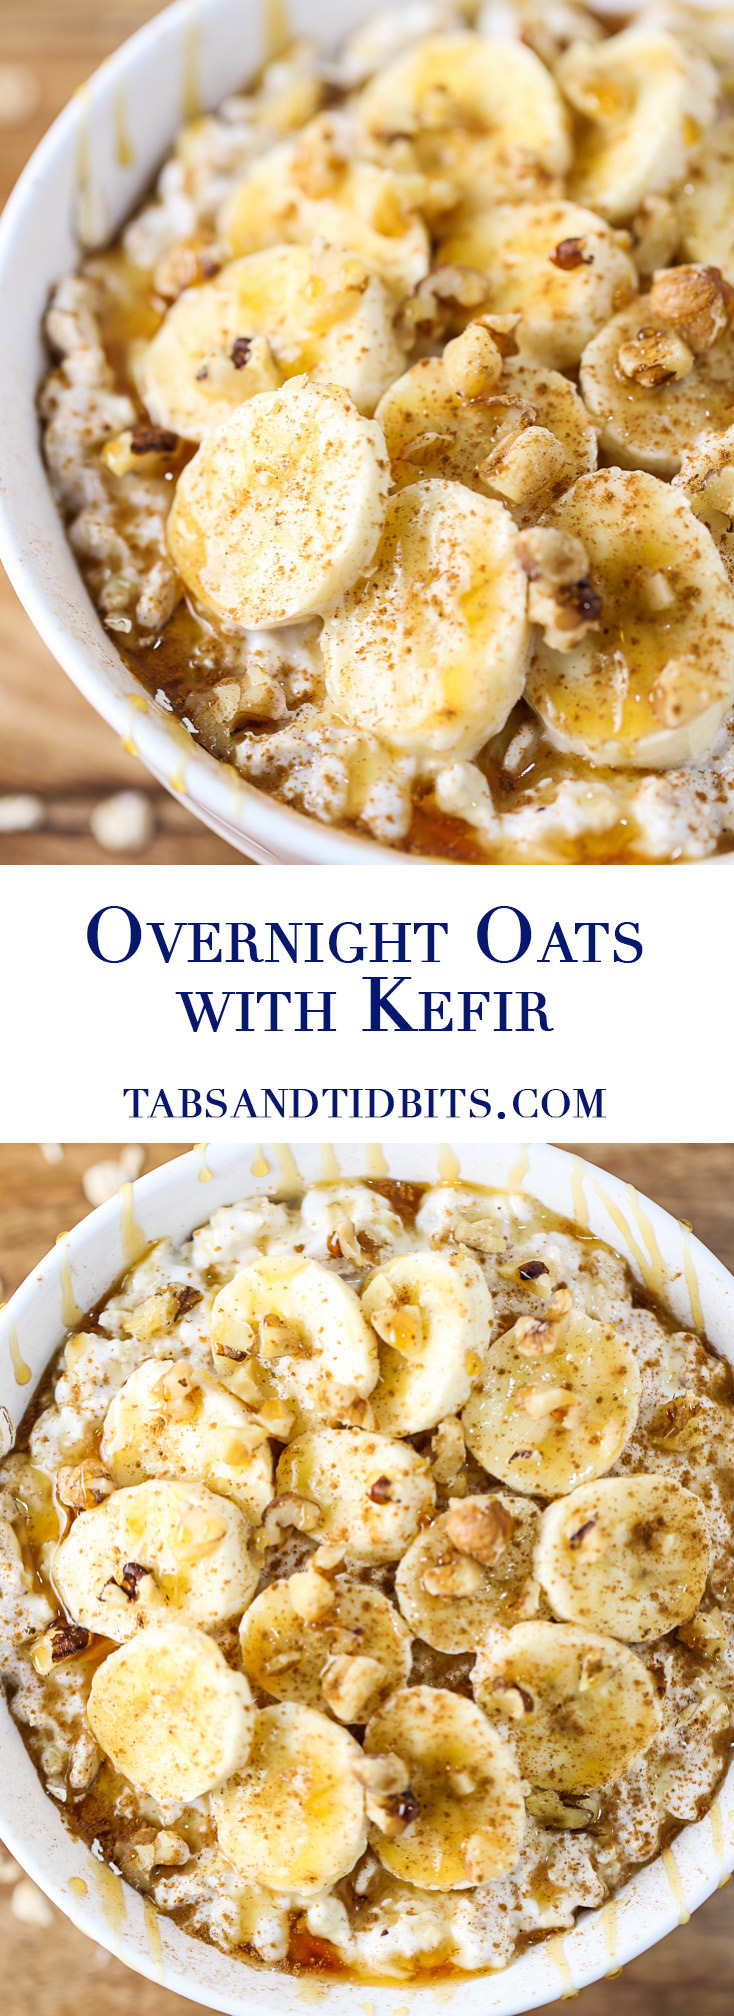 Overnight Oats With Kefir - These overnight oats with kefir provide a filling breakfast with the added benefits of kefir and sweetened naturally with fruit!